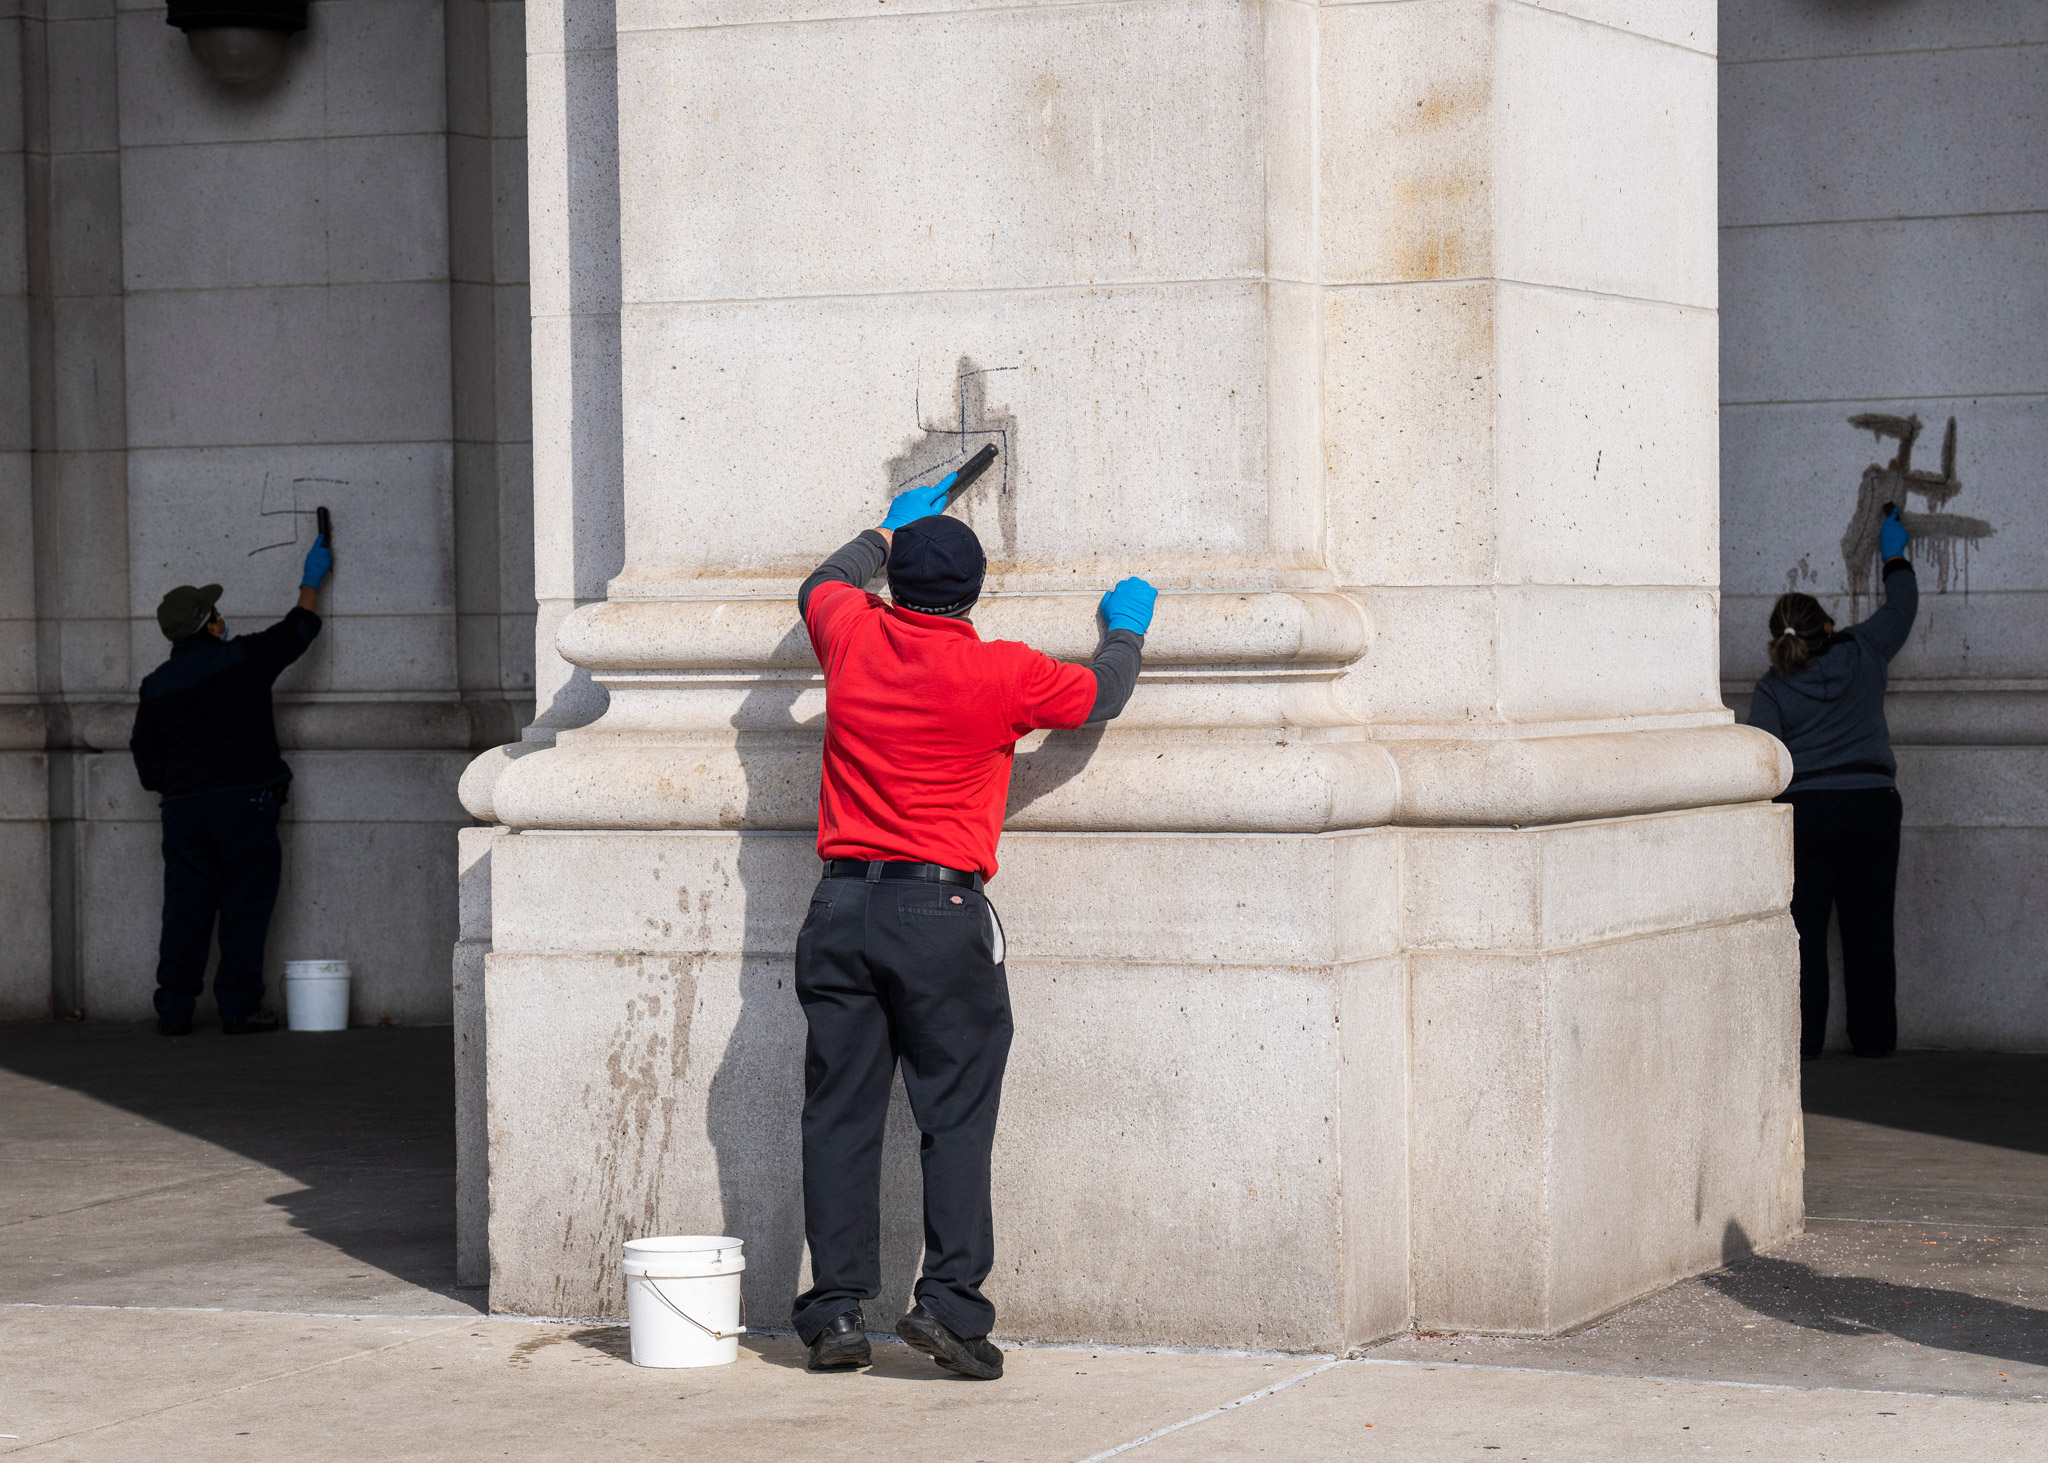 Swastika Clean Up off Union Station in Washington D.C.